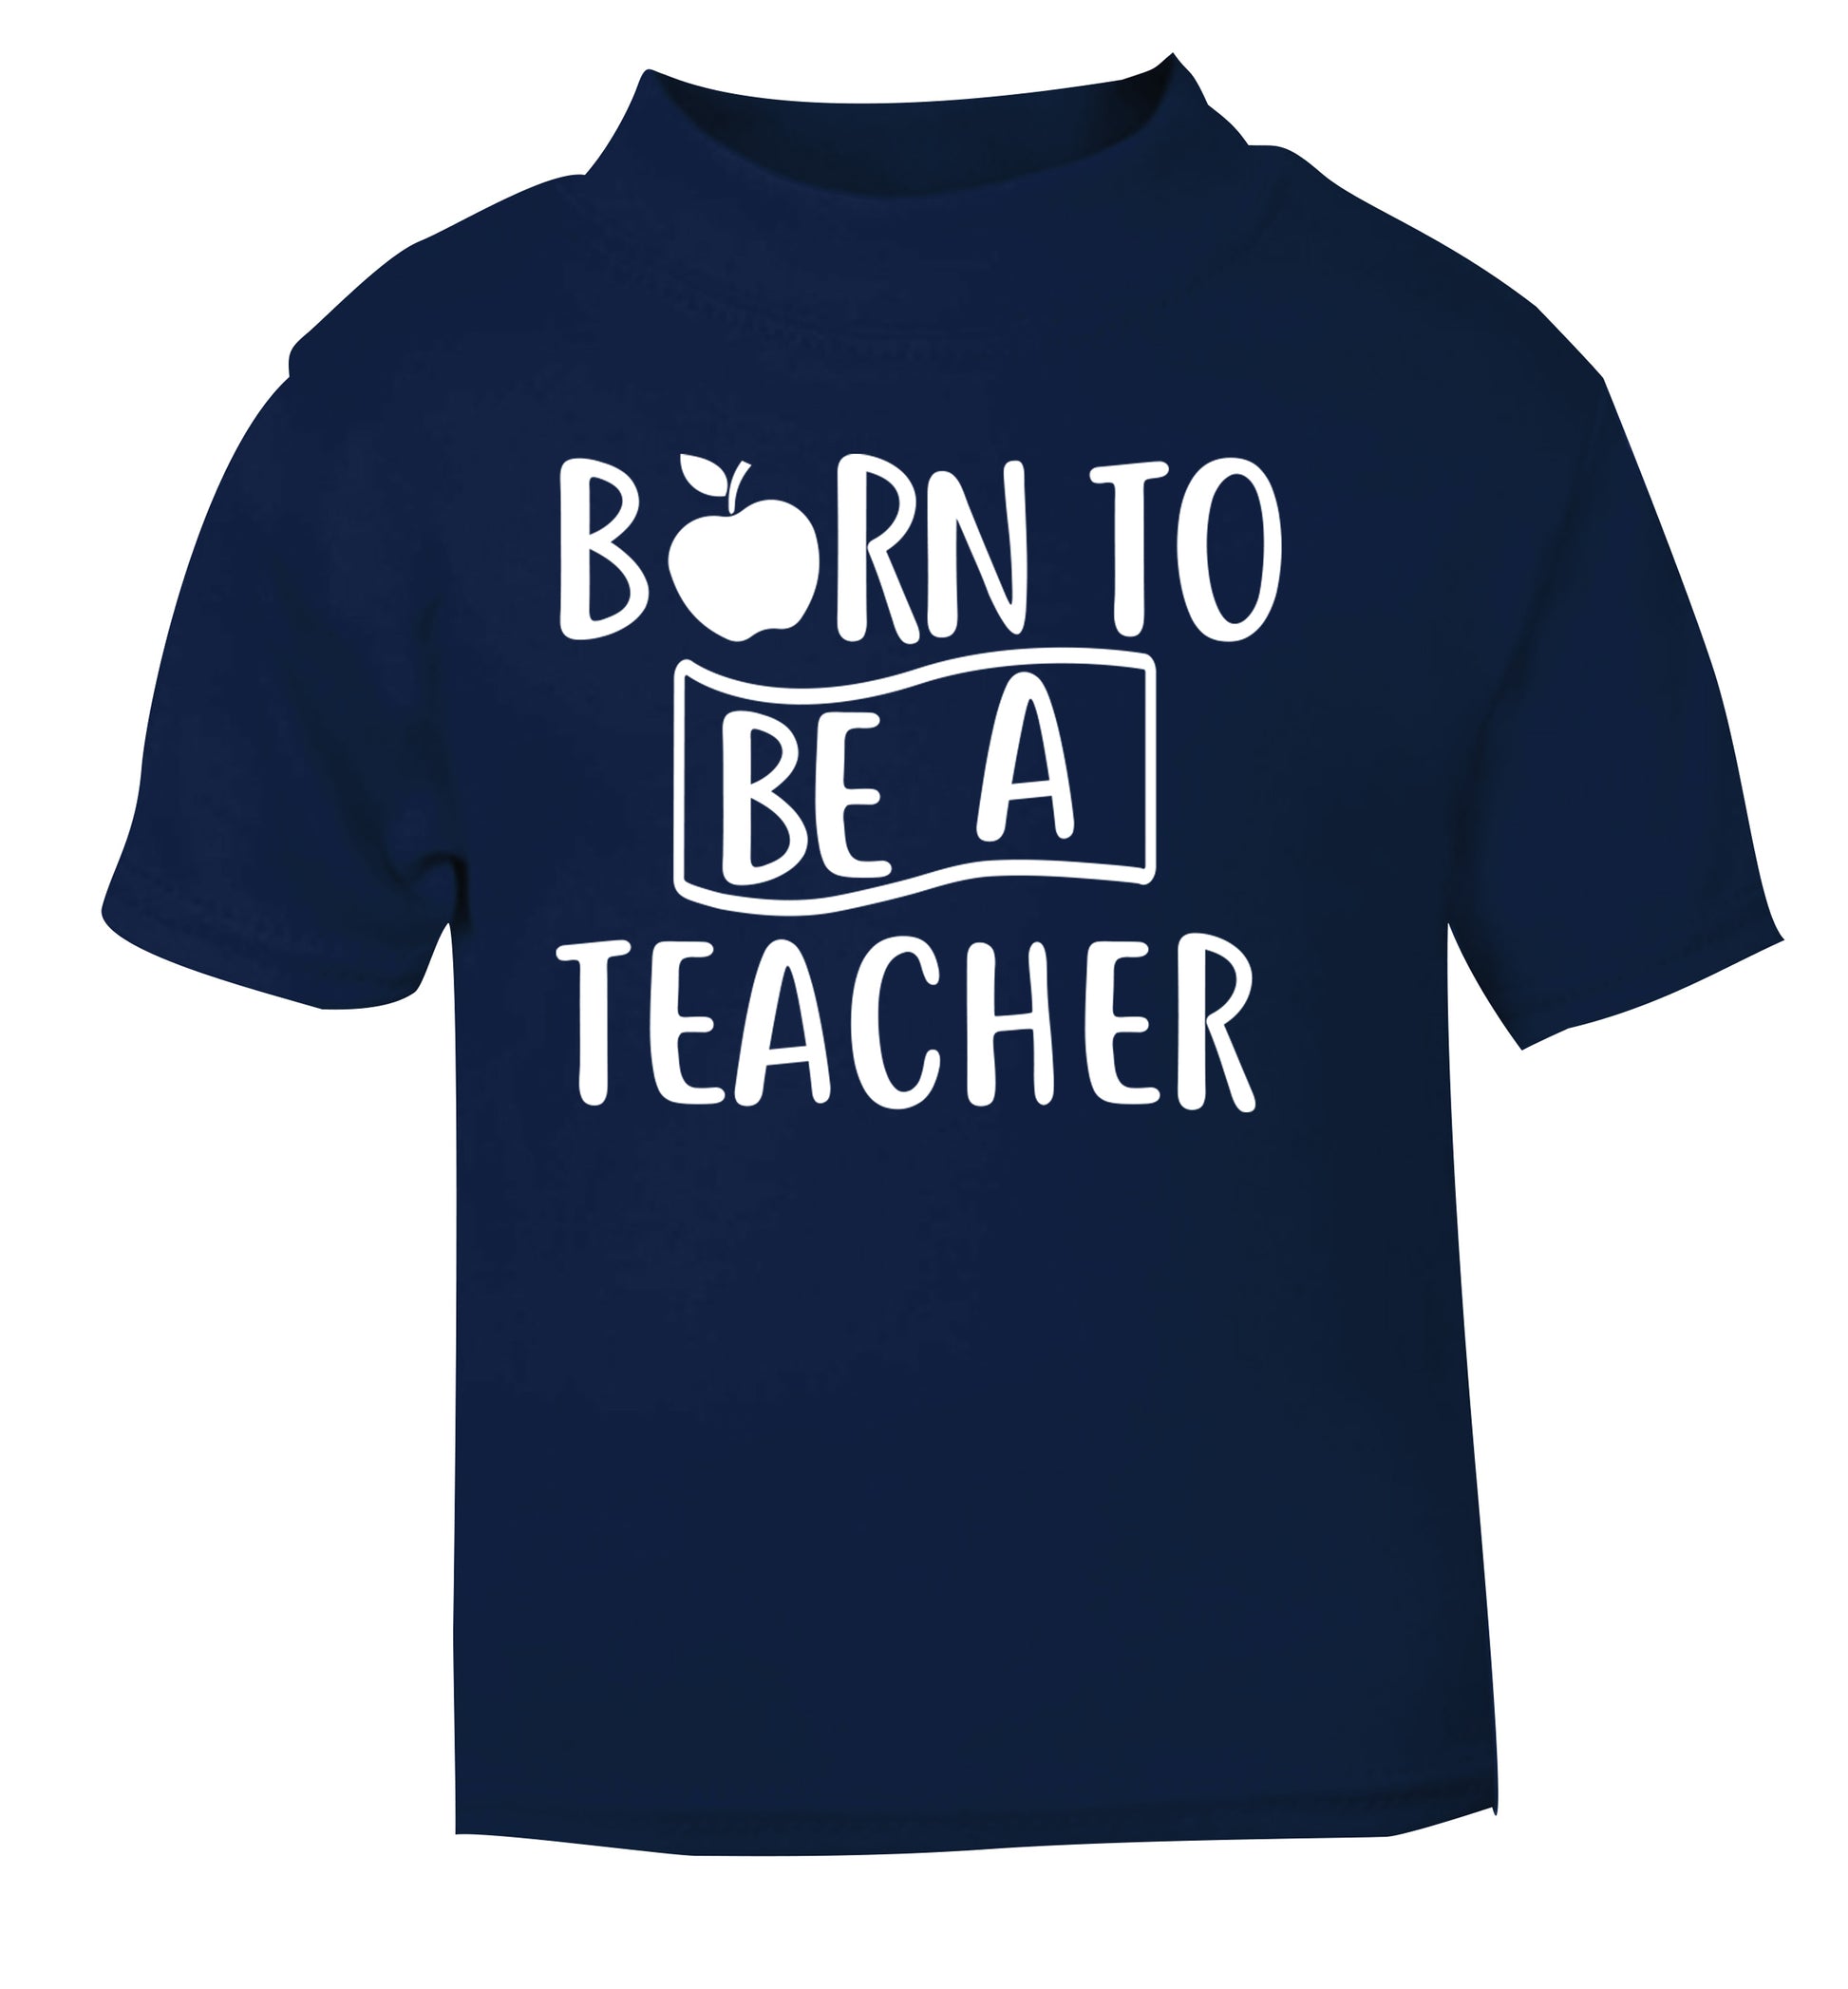 Born to be a teacher navy Baby Toddler Tshirt 2 Years